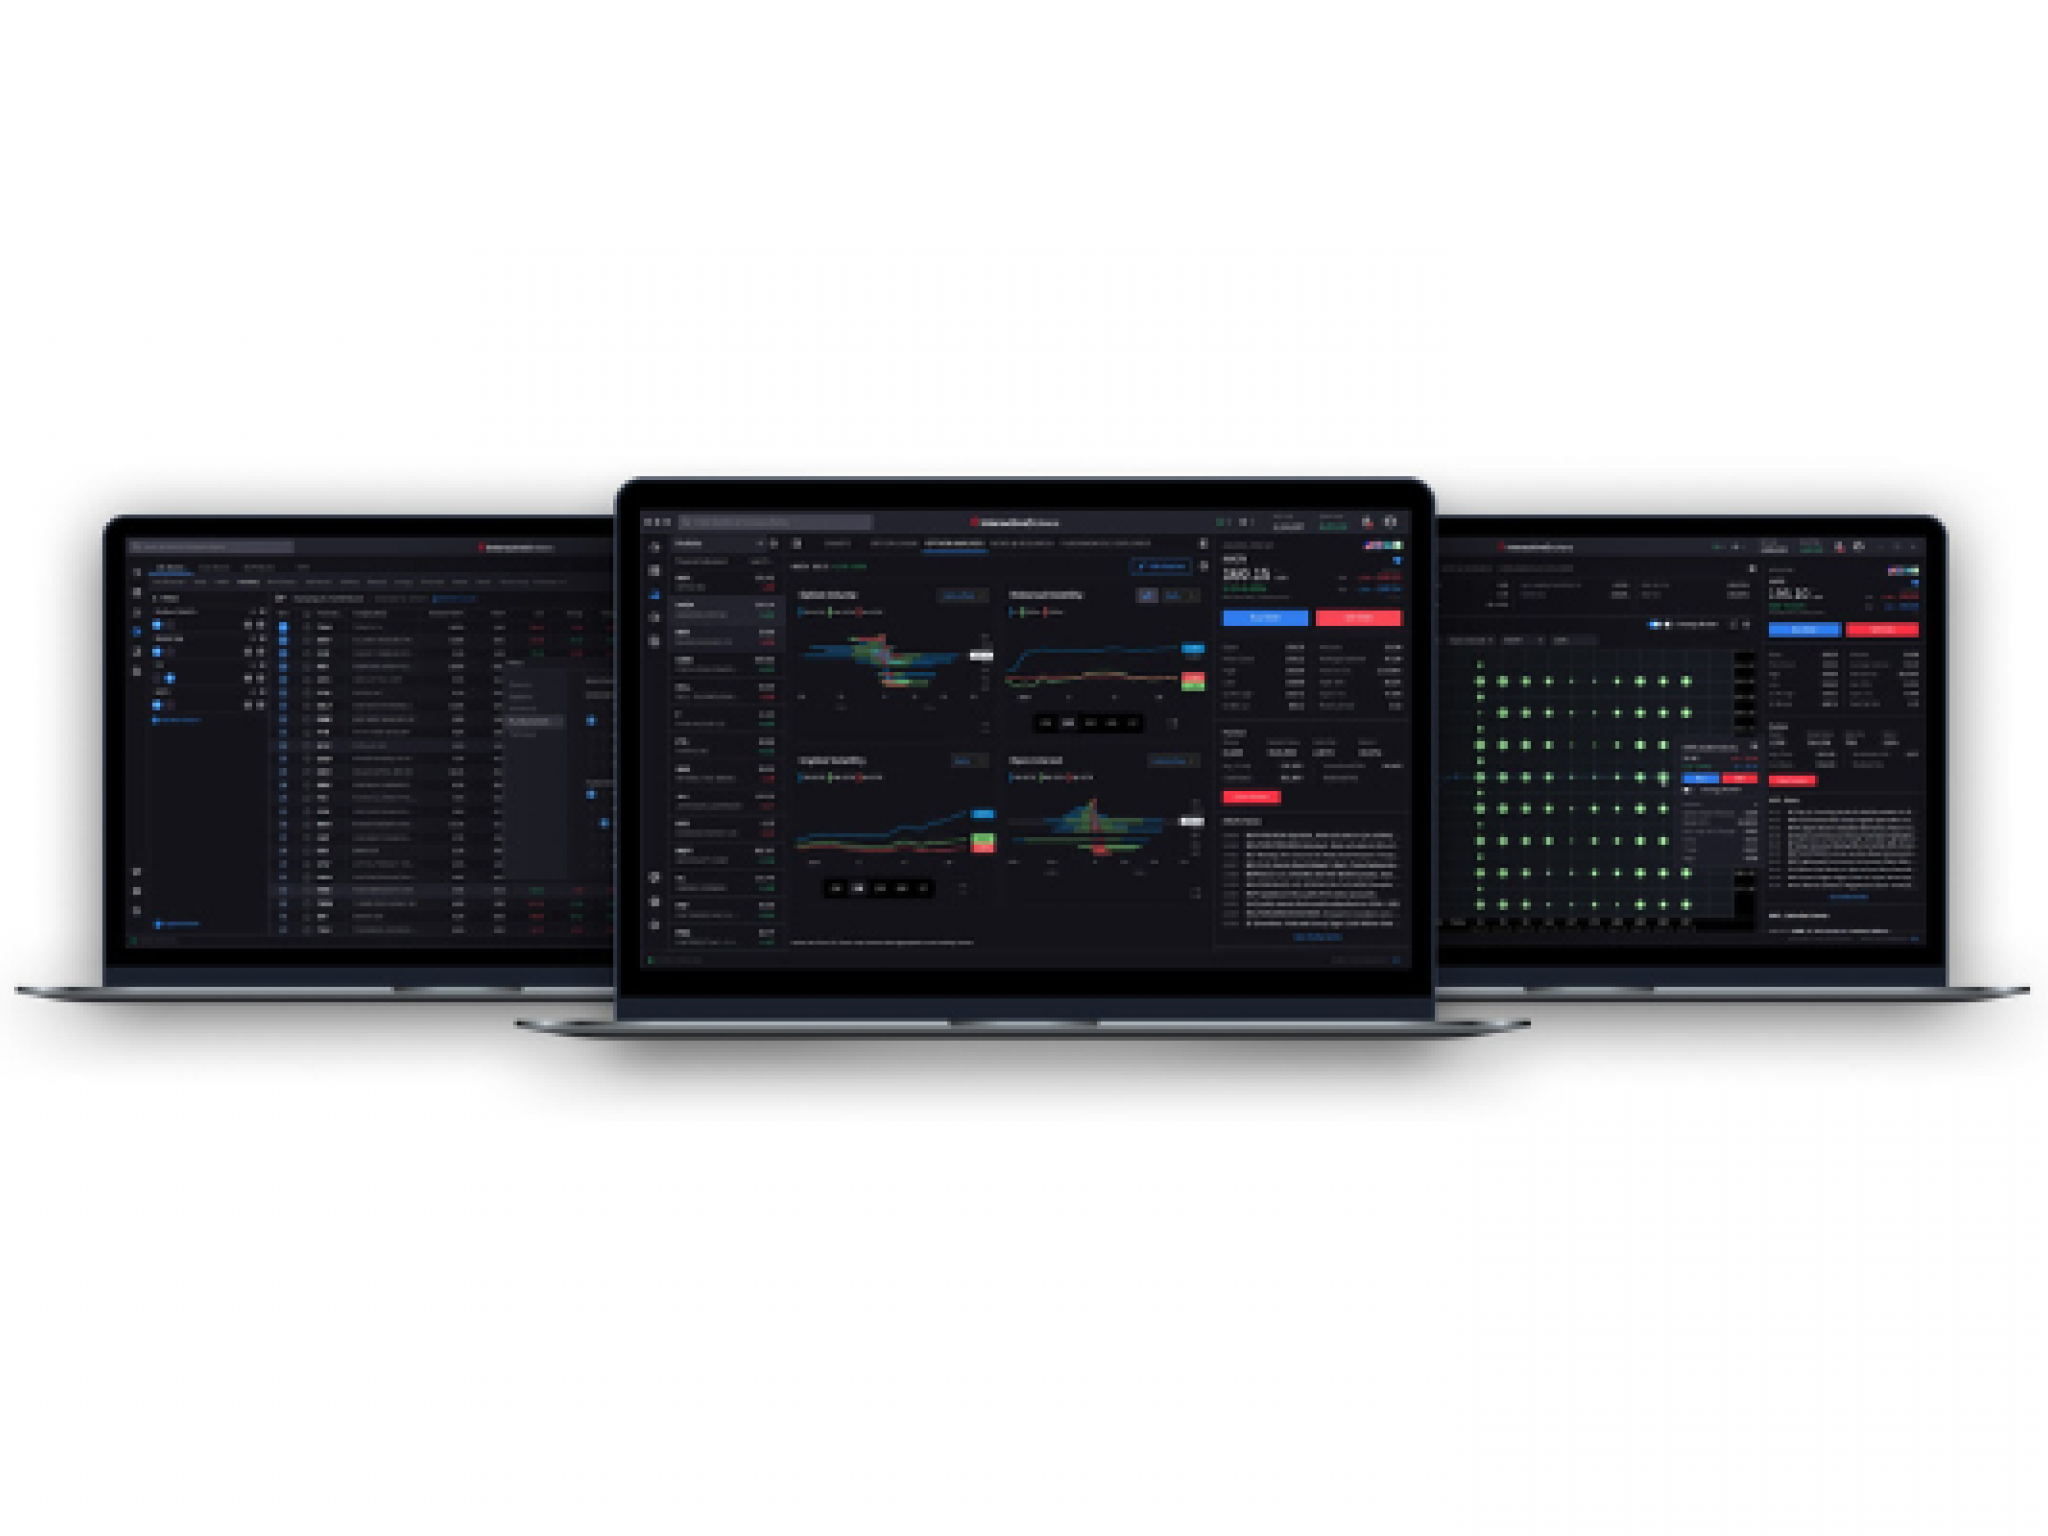  interactive-brokers-launches-desktop-trading-platform-for-whatever-your-need-is-updated 